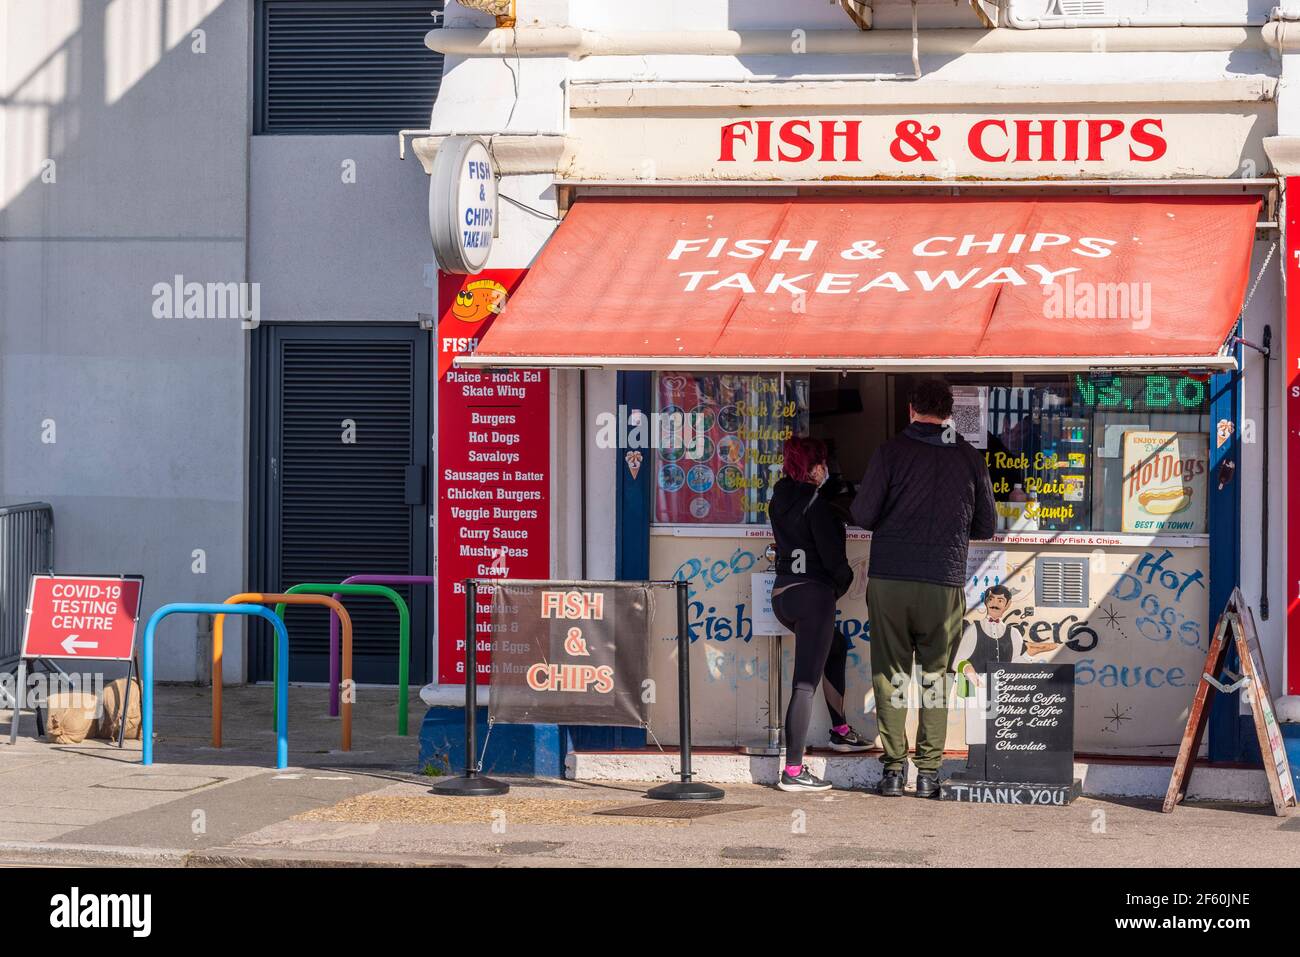 Southend on Sea, Essex, UK. 29th Mar, 2021. The first day of the UK’s easing of lockdown has cleared into a bright and sunny day, though remaining cool. Seafront cafes are open for take-away business. Fish & Chips takeaway shop with customers. Sign for COVID 19 testing centre next door Stock Photo